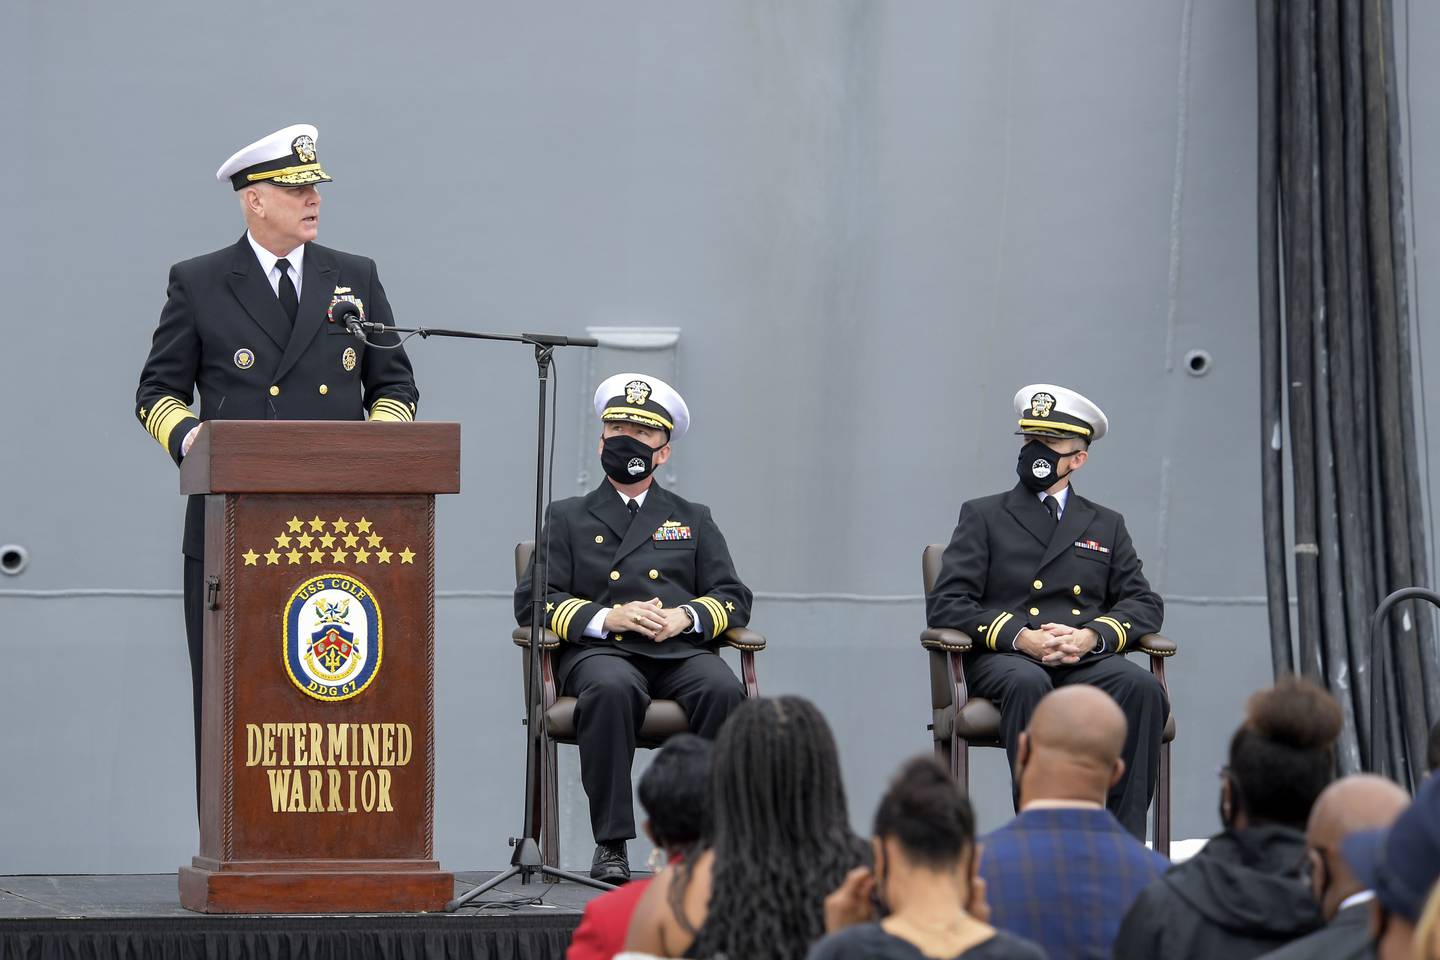 NORFOLK (Oct. 12, 2020) Adm. Christopher Grady, Commander, U.S. Fleet Forces Command, speaks at the Arleigh Burke-class guided missile destroyer USS Cole (DDG 67) 20th Anniversary memorial ceremony at Naval Station Norfolk. USS Cole was attacked by terrorists at 11:18 a.m. on Oct. 12, 2000, while moored for refueling in the Port of Aden, Yemen. The explosive bomb created a 40-by-60-foot hole on the port side of the ship, and the Cole's Sailors fought fires and flooding for the following 96 hours to keep the ship afloat. Commemoration events on the 20th anniversary of the attack remember and honor the 17 Sailors who were killed, the 37 who were injured and the Gold Star families. (U.S. Navy photo by Mass Communication Specialist 2nd Class Darien G. Kenney)